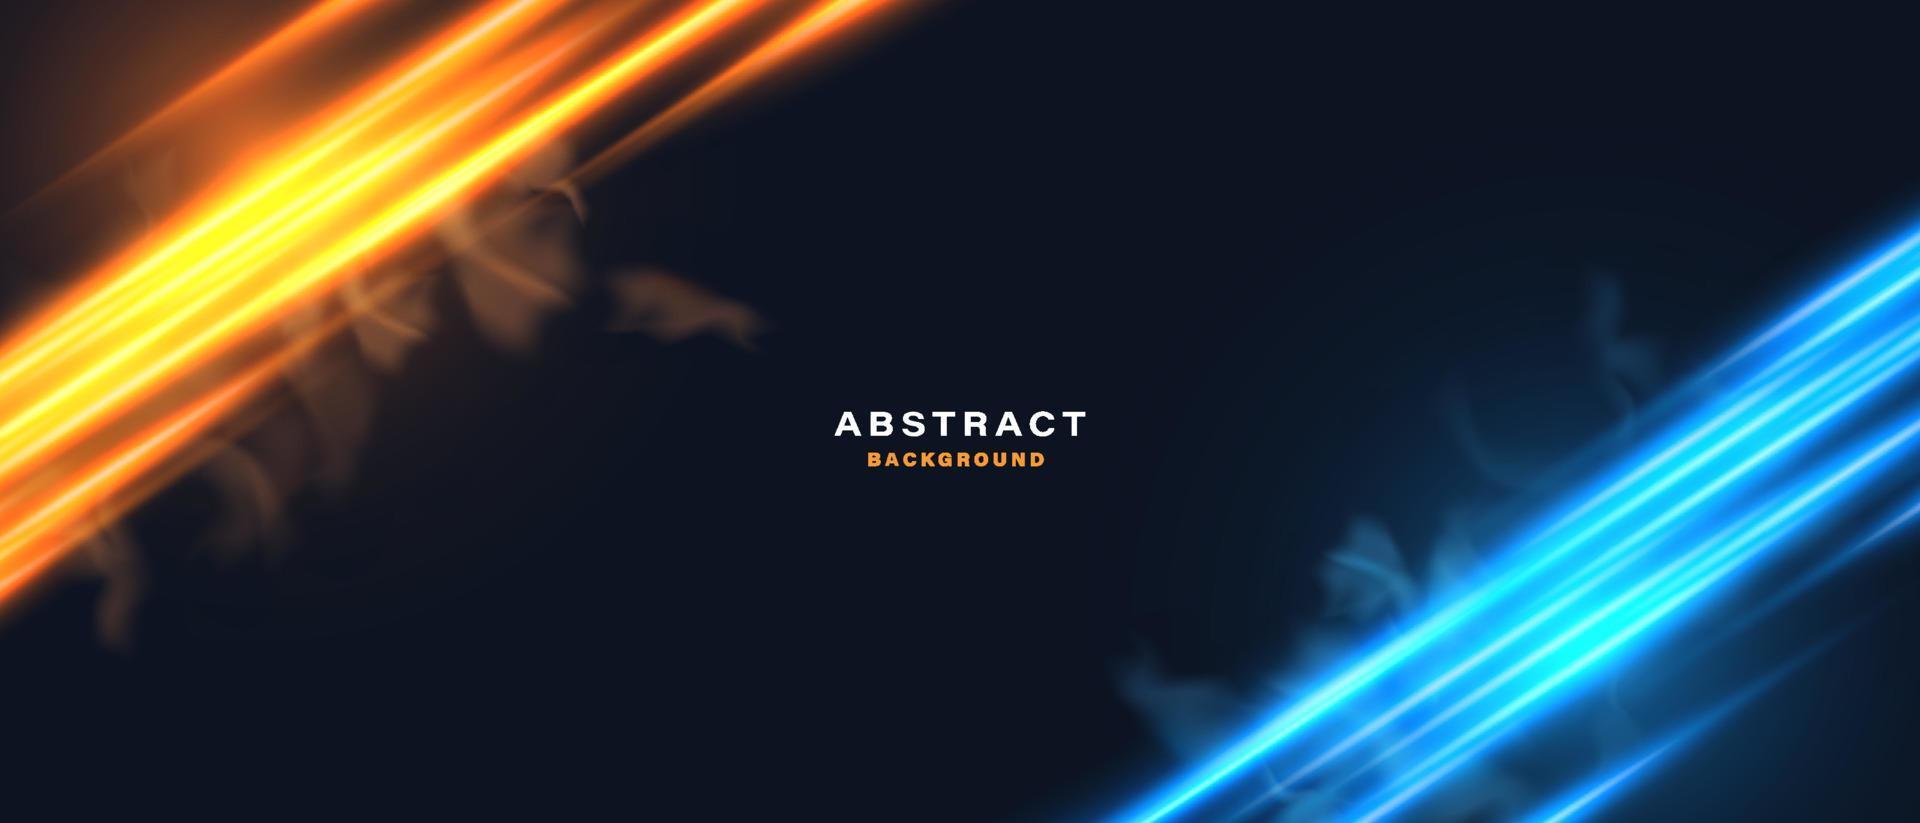 Abstract digital technology background with glowing light effect vector